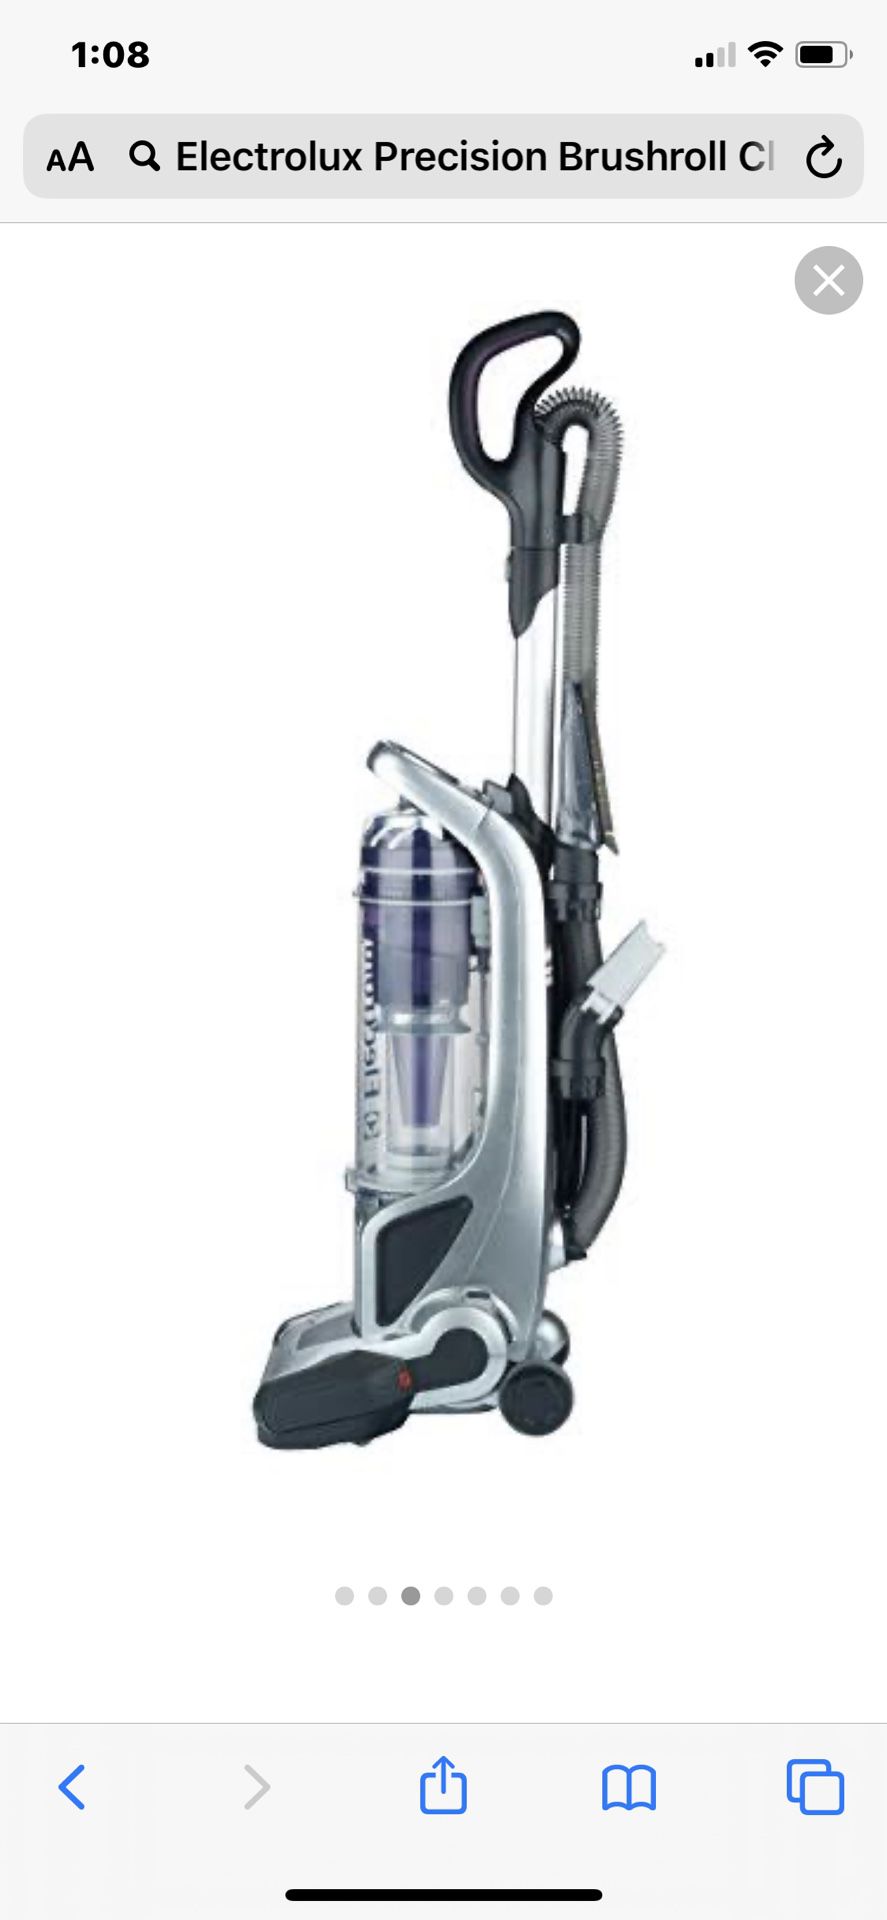 EL1188A Electrolux Precision Brushroll Bagless Upright Vacuum Hardly Used Like New Pet Hair Similar to Hoover or Dyson